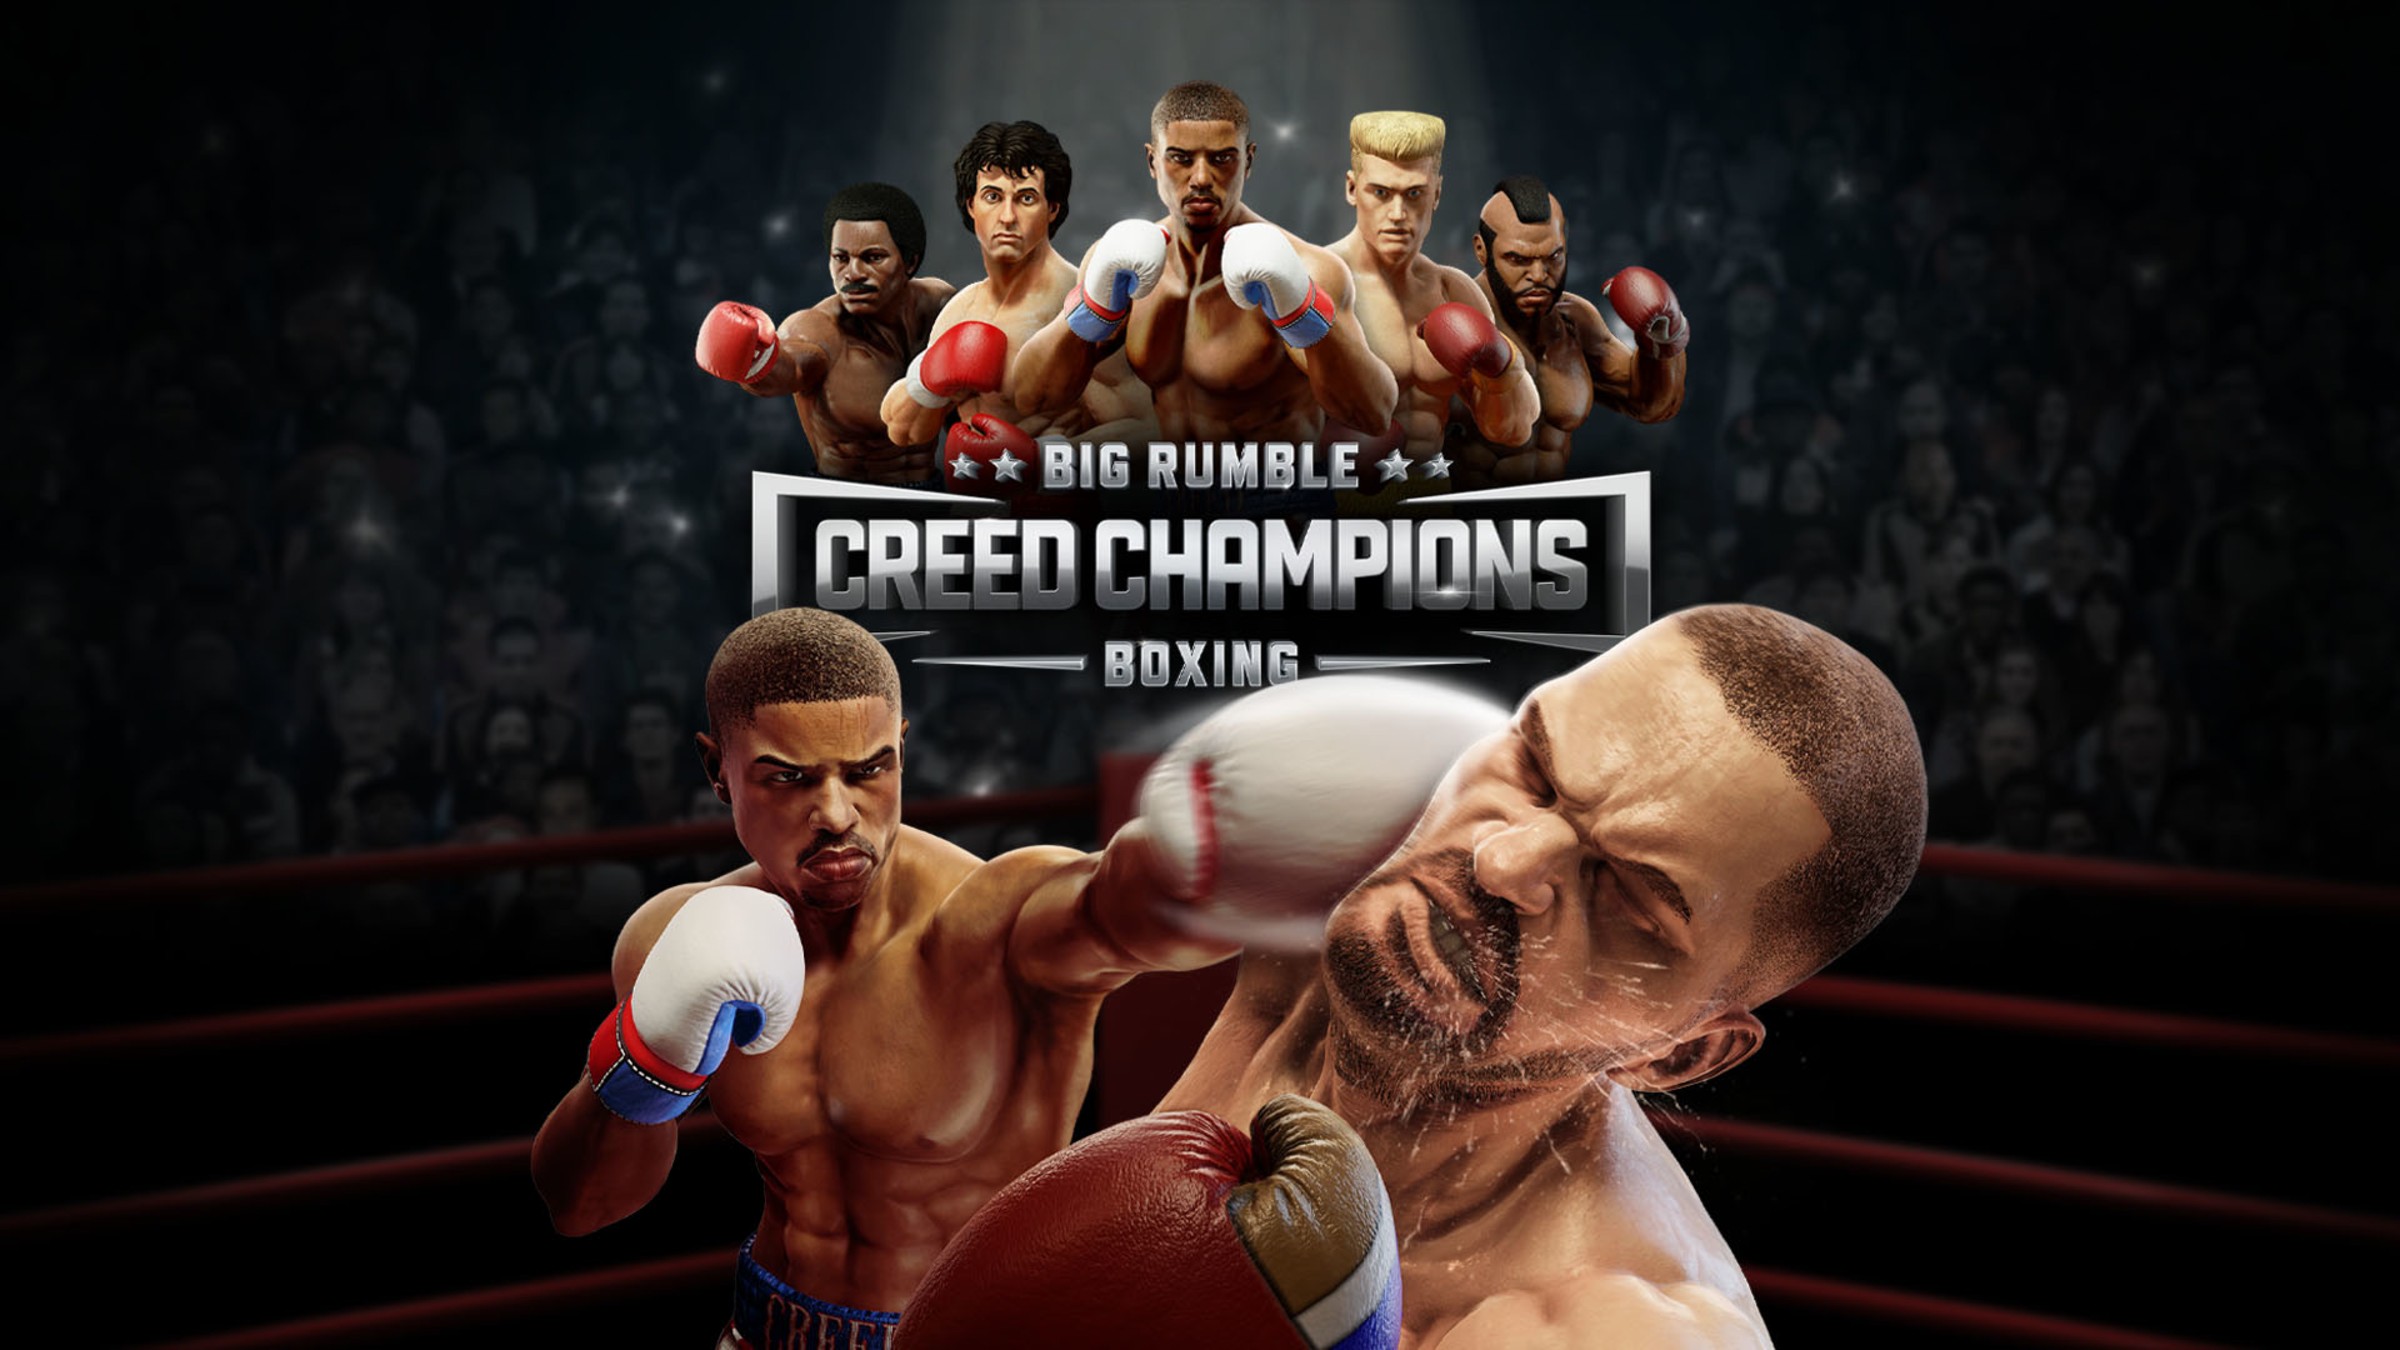 Big Rumble Boxing Creed Champions for Nintendo Switch